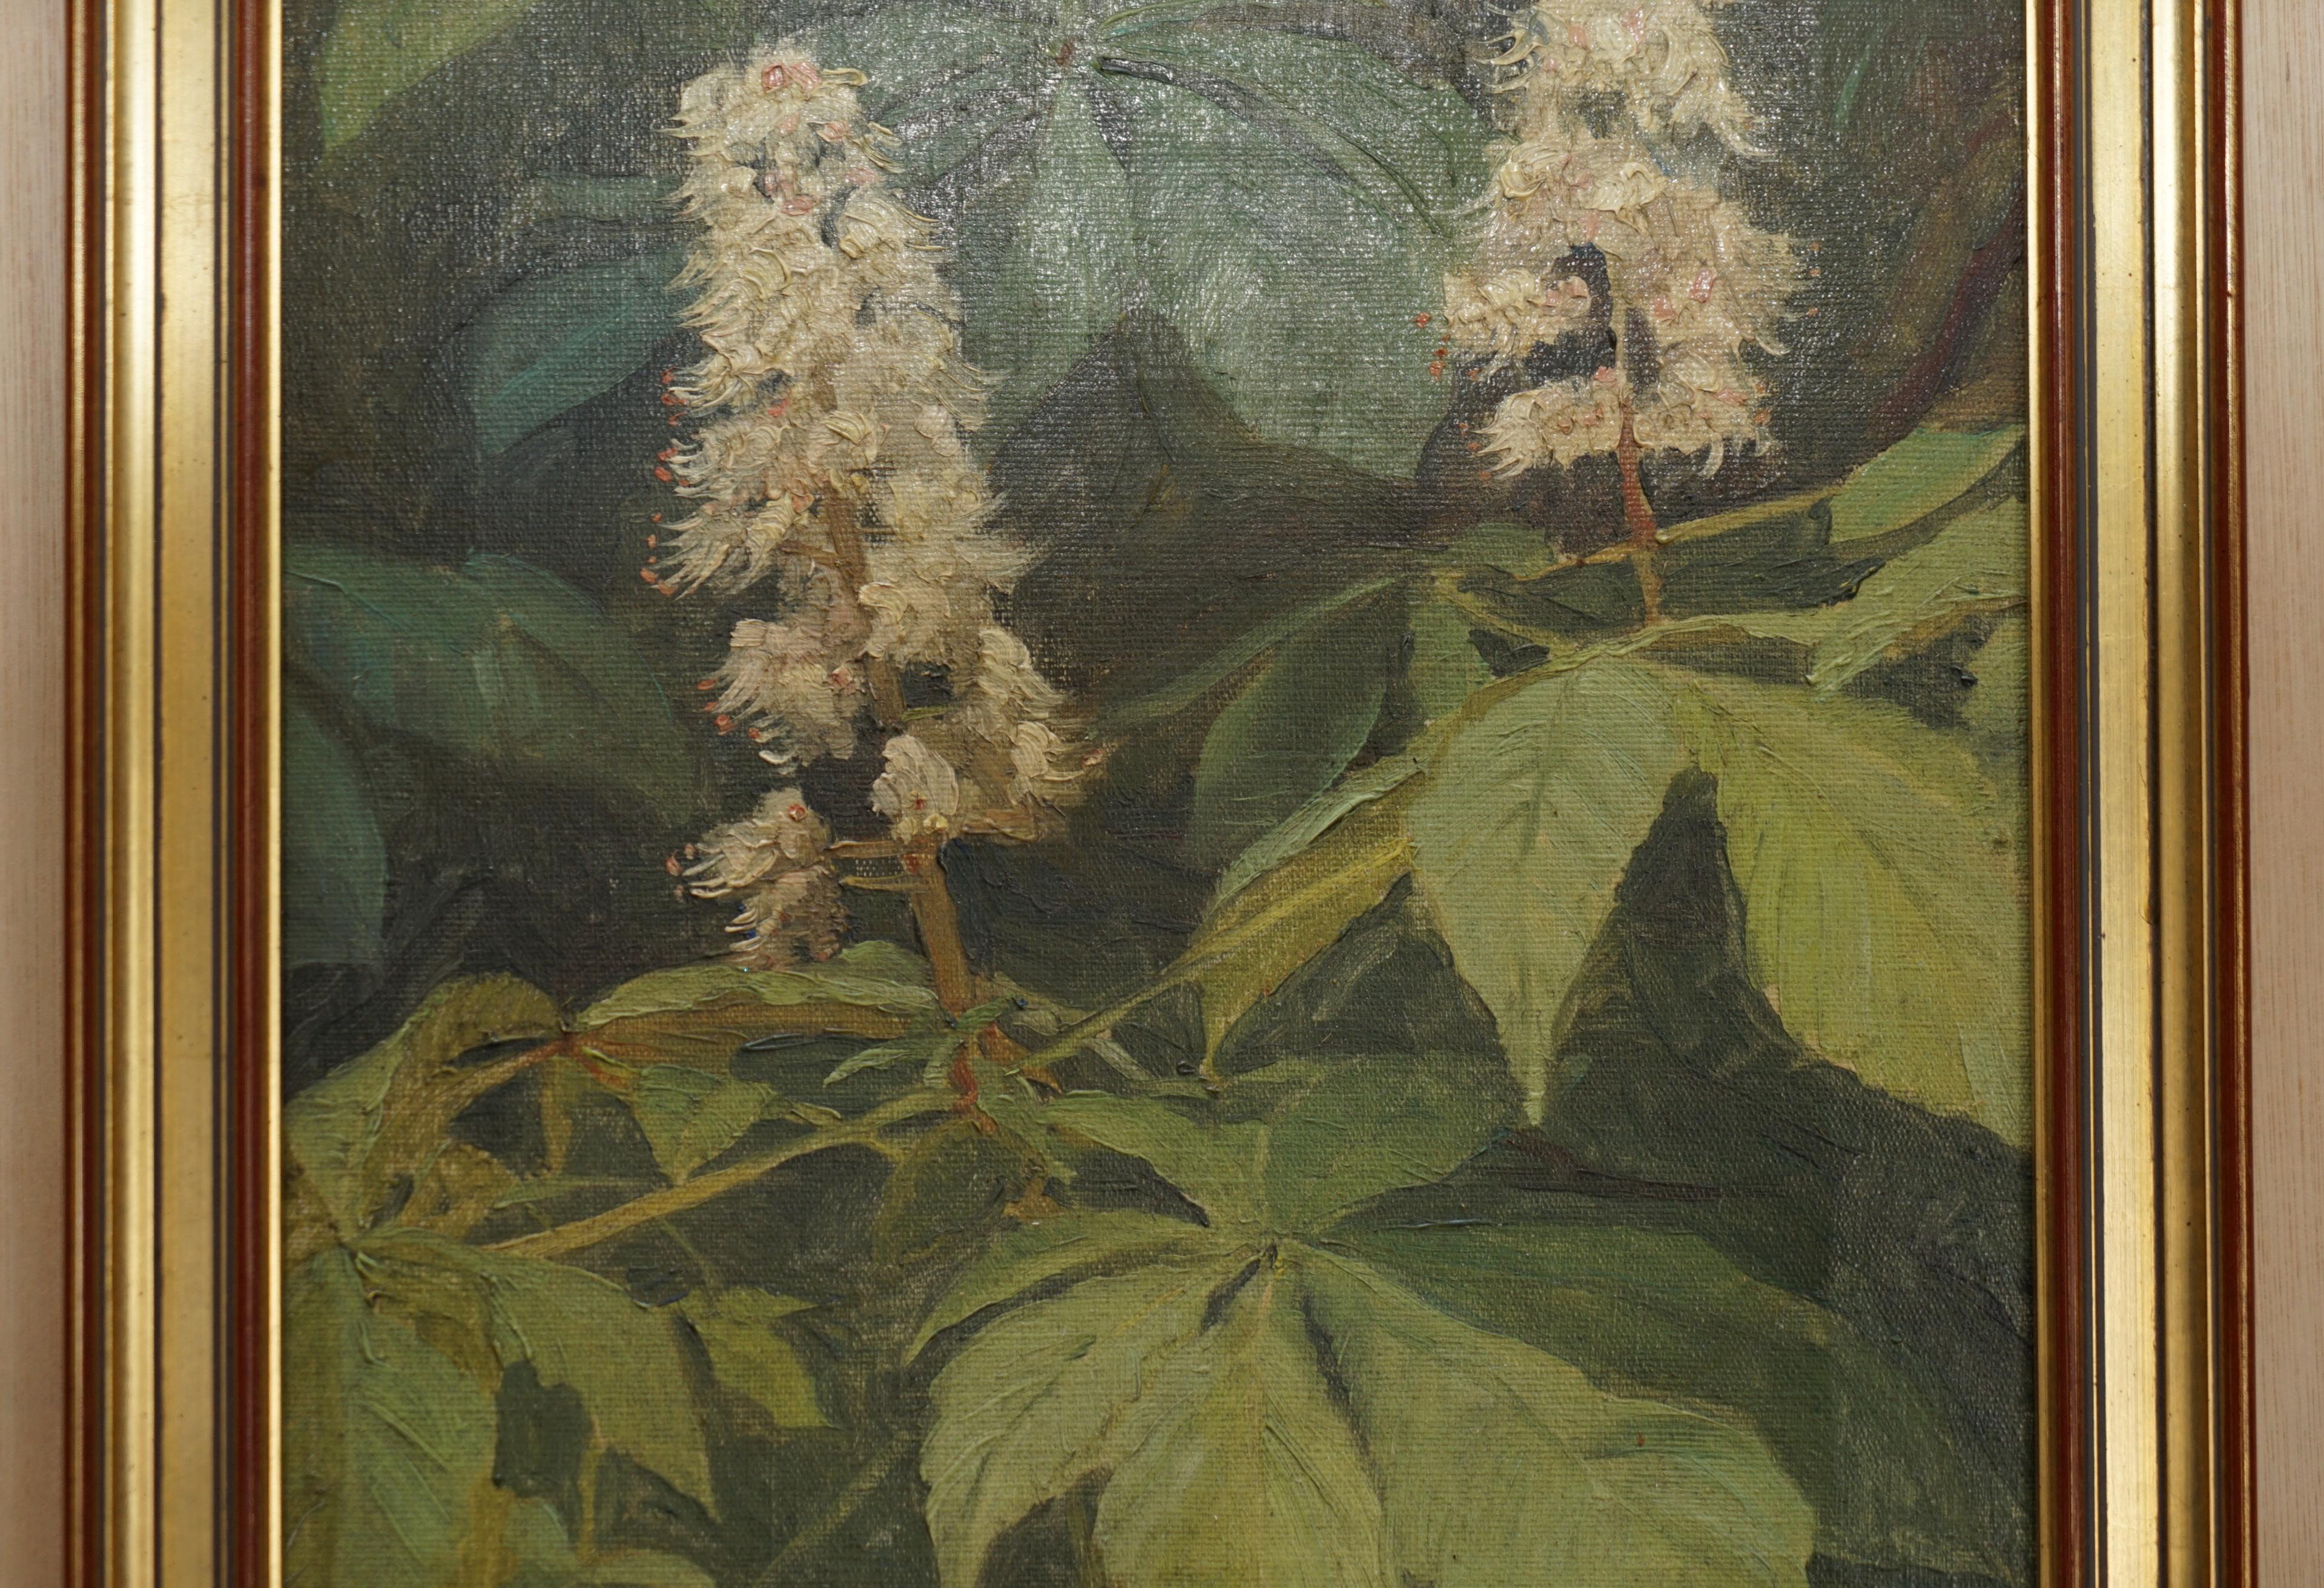 High Victorian Lovely Victorian Oil on Canvus Painting by E.Drvee circa 1880-1900 of Flowers